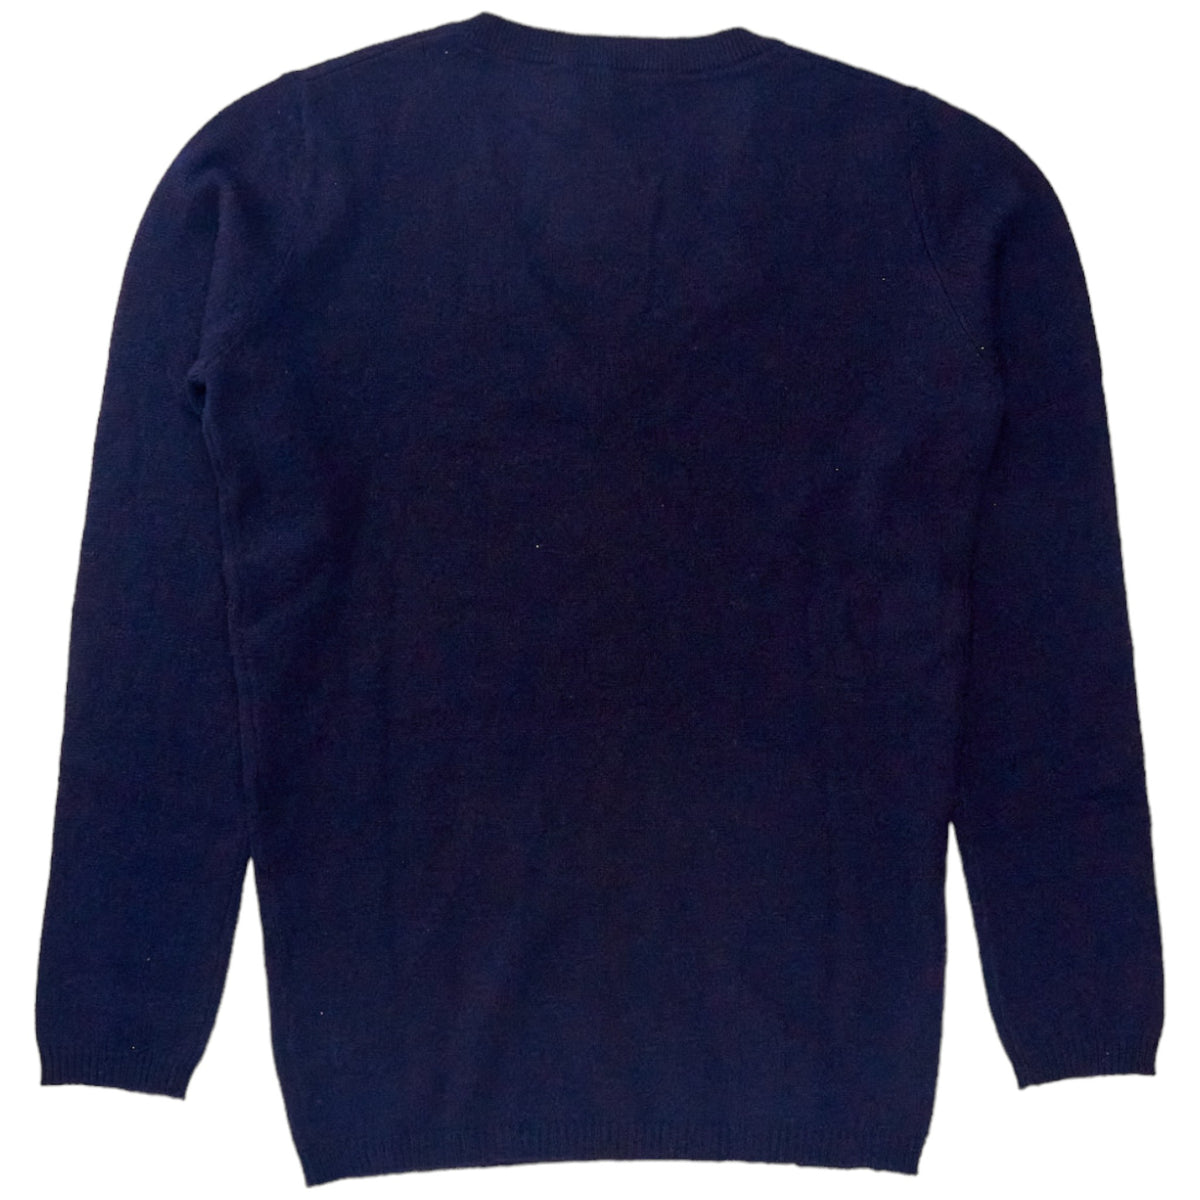 N. Peal Navy Gauzy Cashmere Sweater